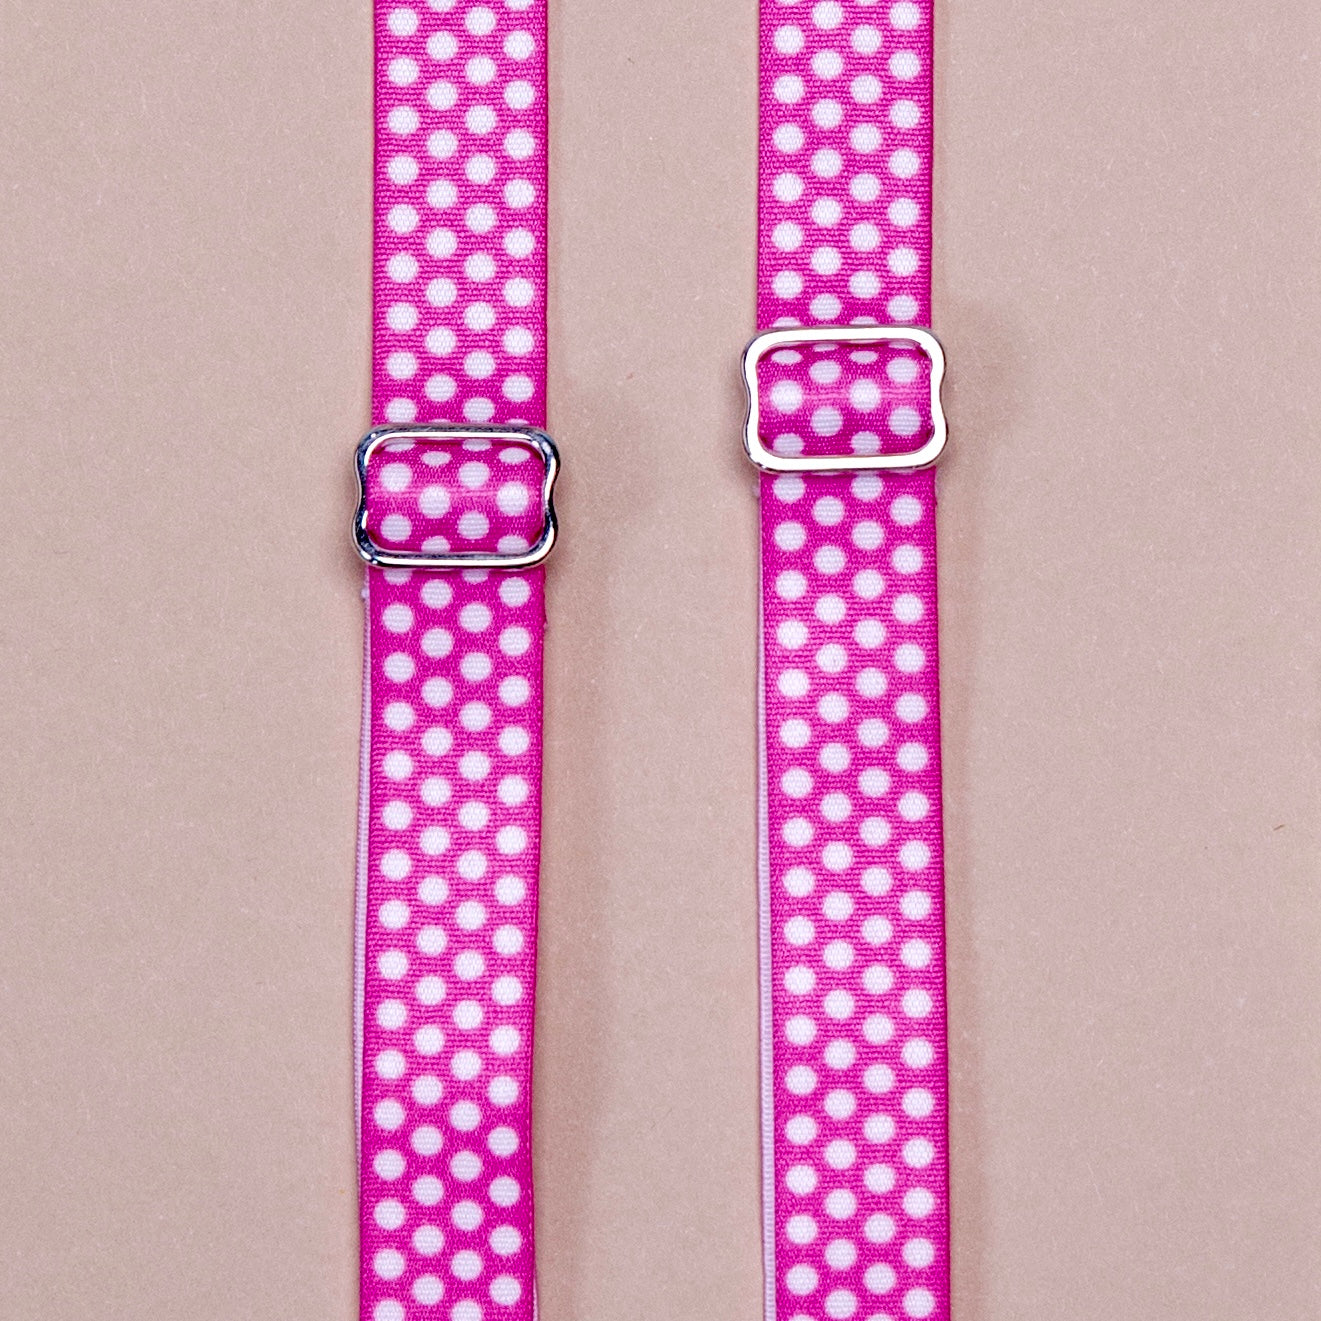 Strawberry Polka Her-Rah Straps - Dark pink strap with small uniform light pink polka dots repeating the length of the strap, featuring metal hardwear.